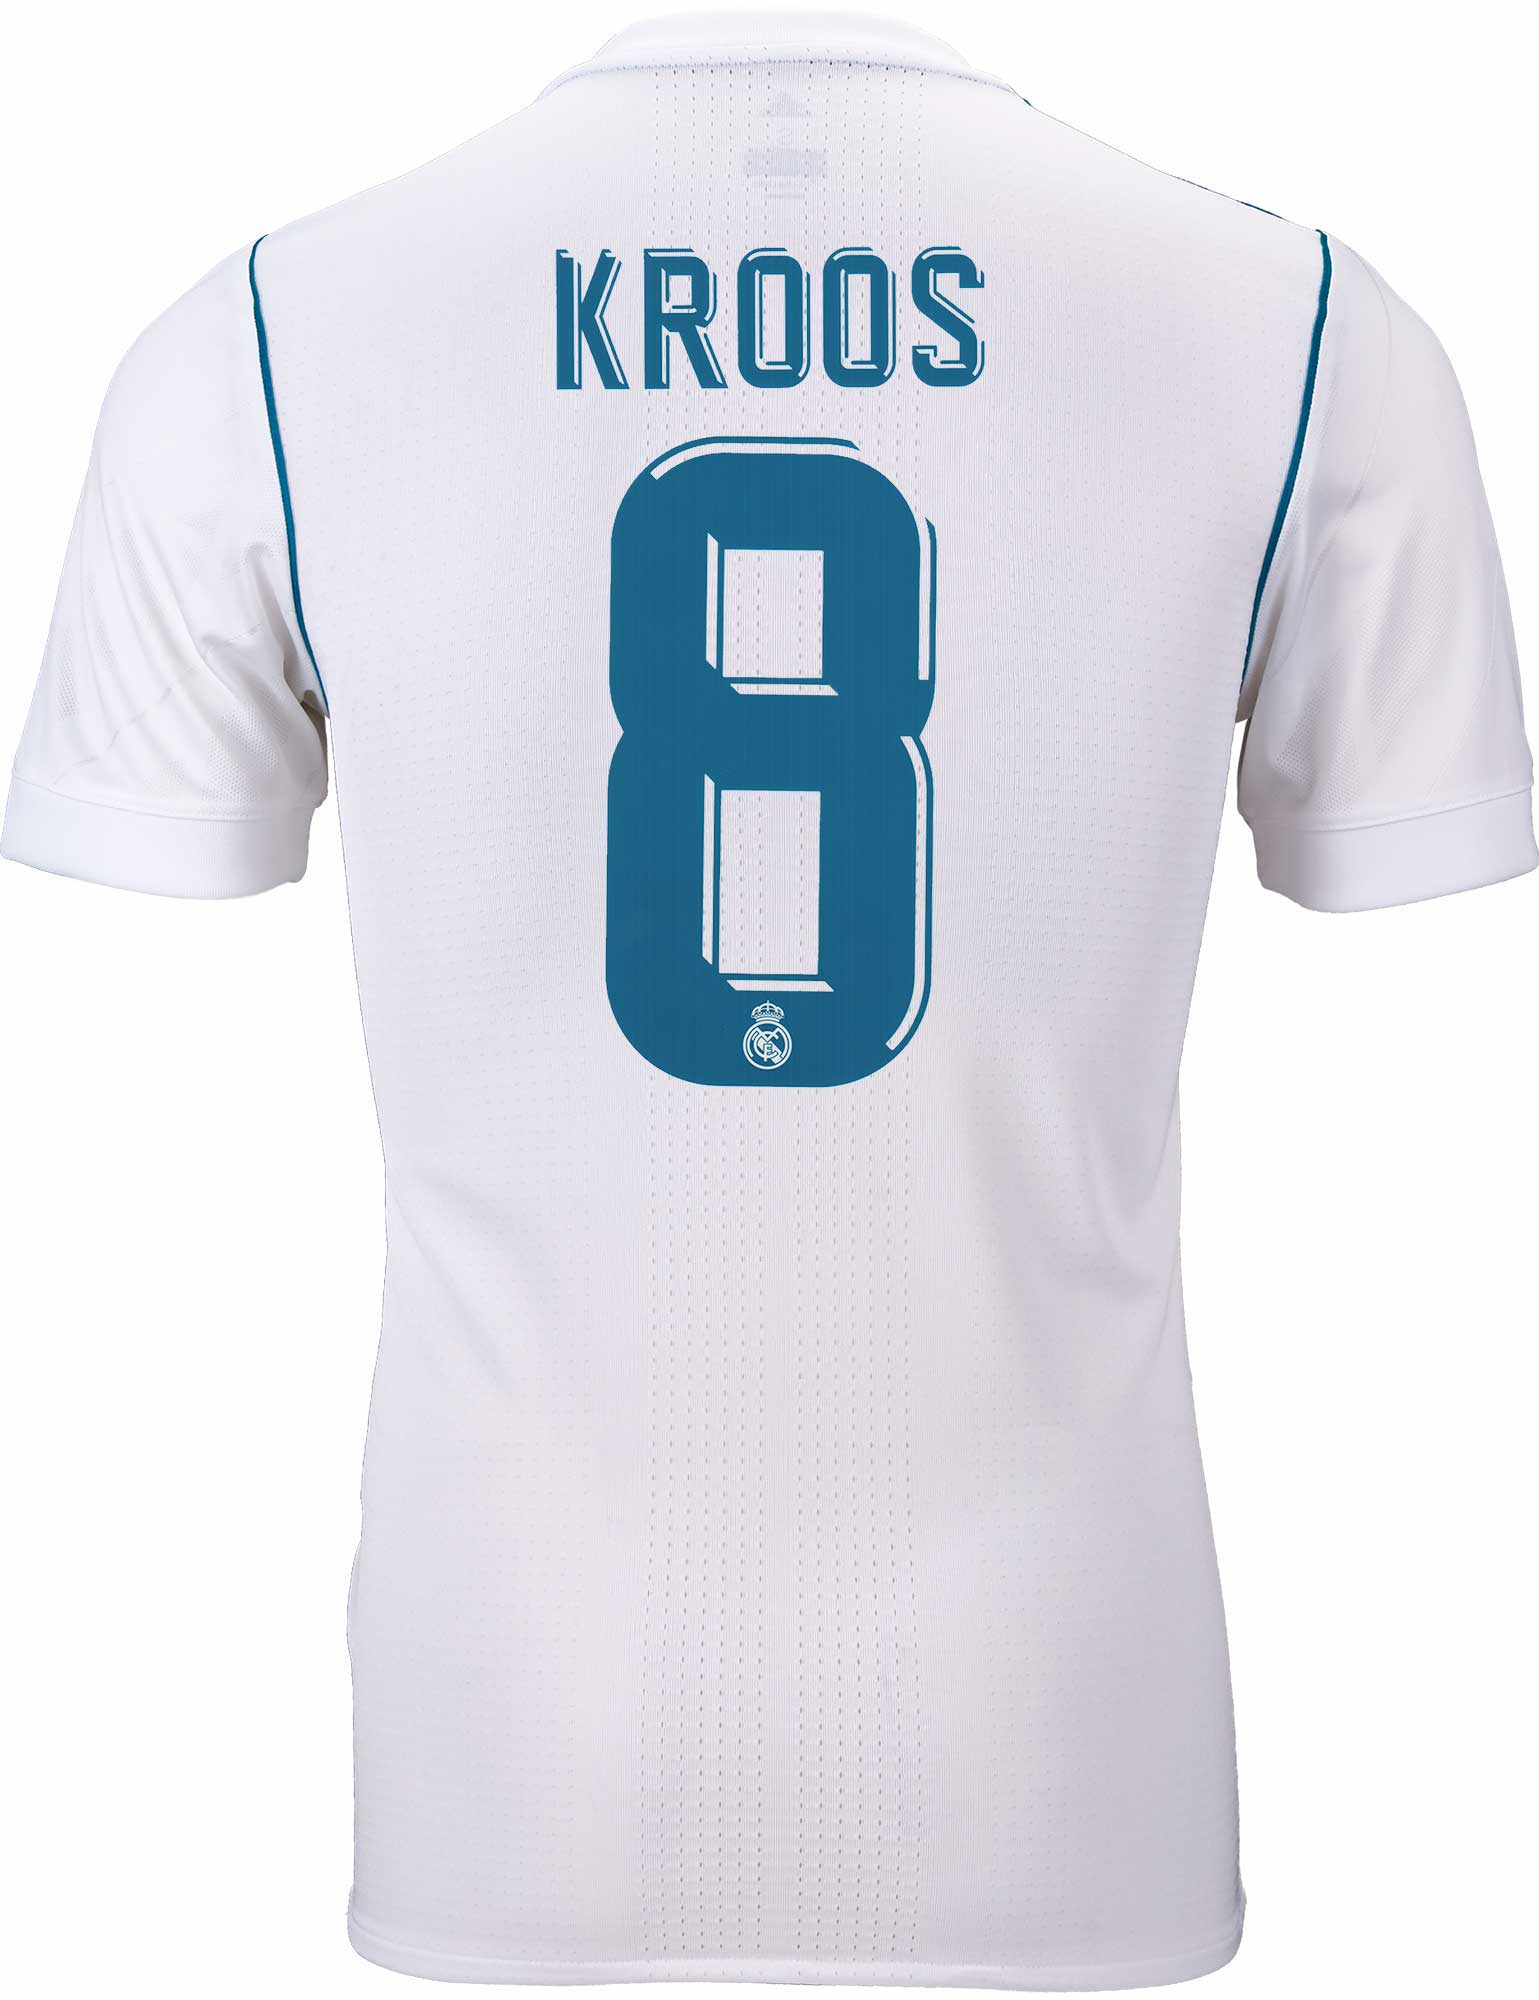 2017/18 adidas Toni Kroos Real Madrid Authentic Home Jersey - SoccerPro